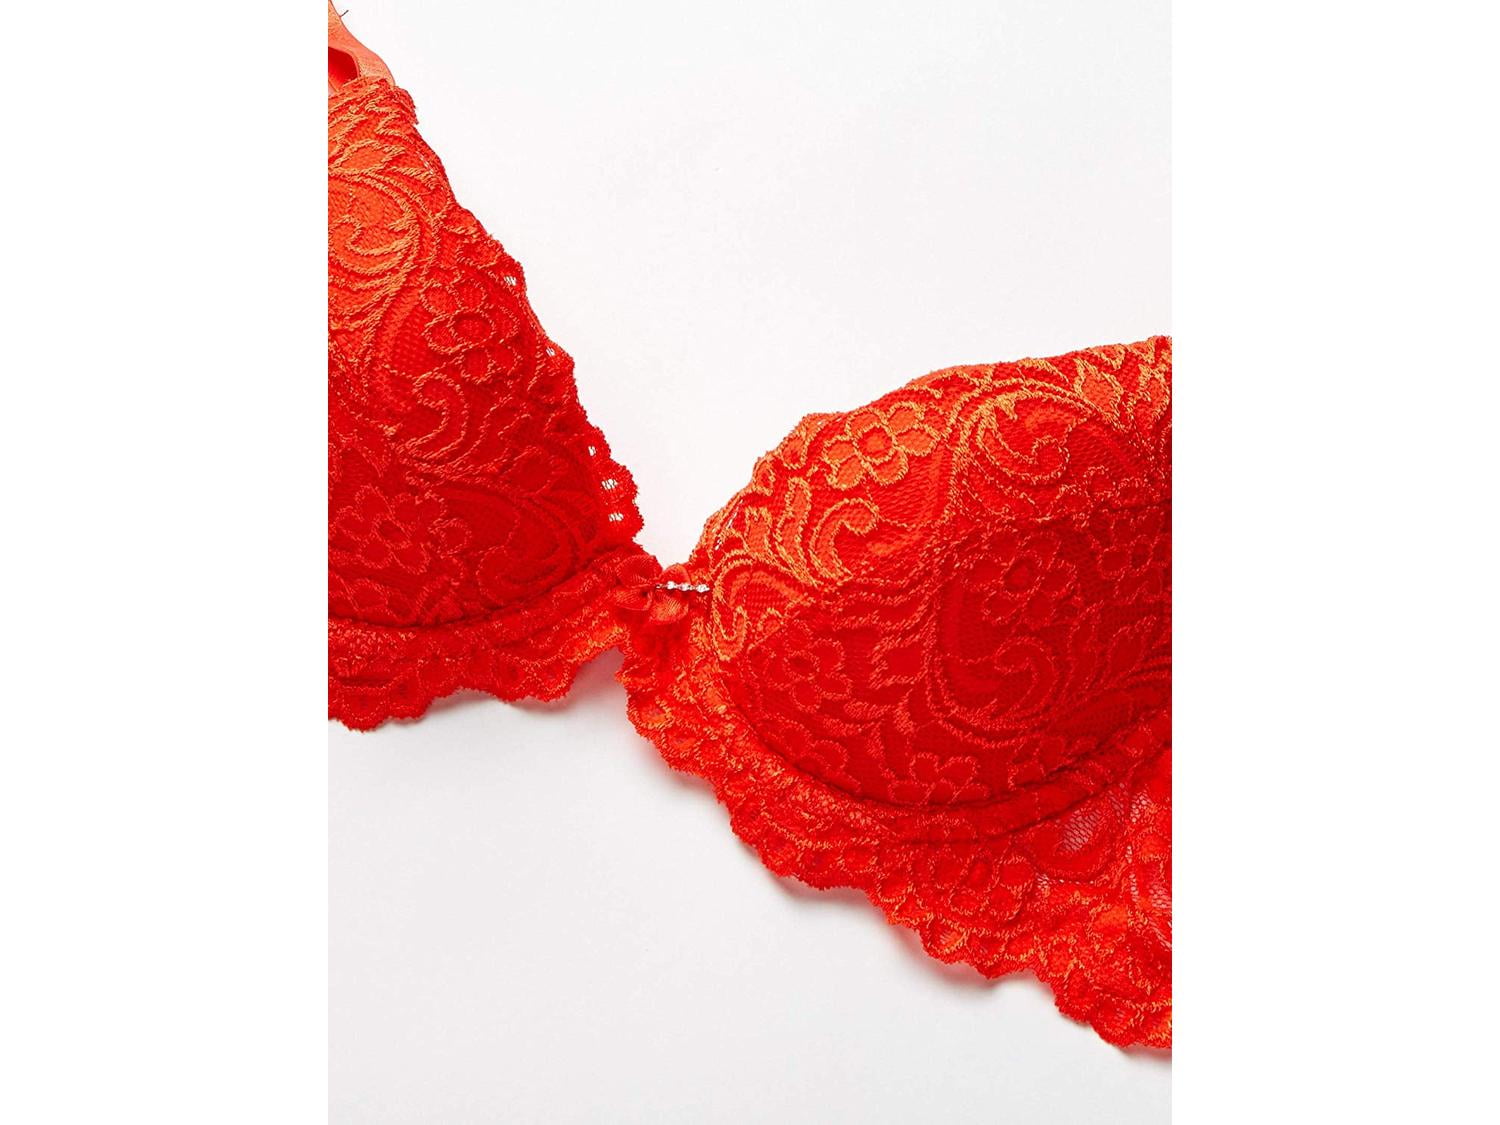 Smart And Sexy Smart And Sexy Women S Signature Lace Push Up Bra Style 85046